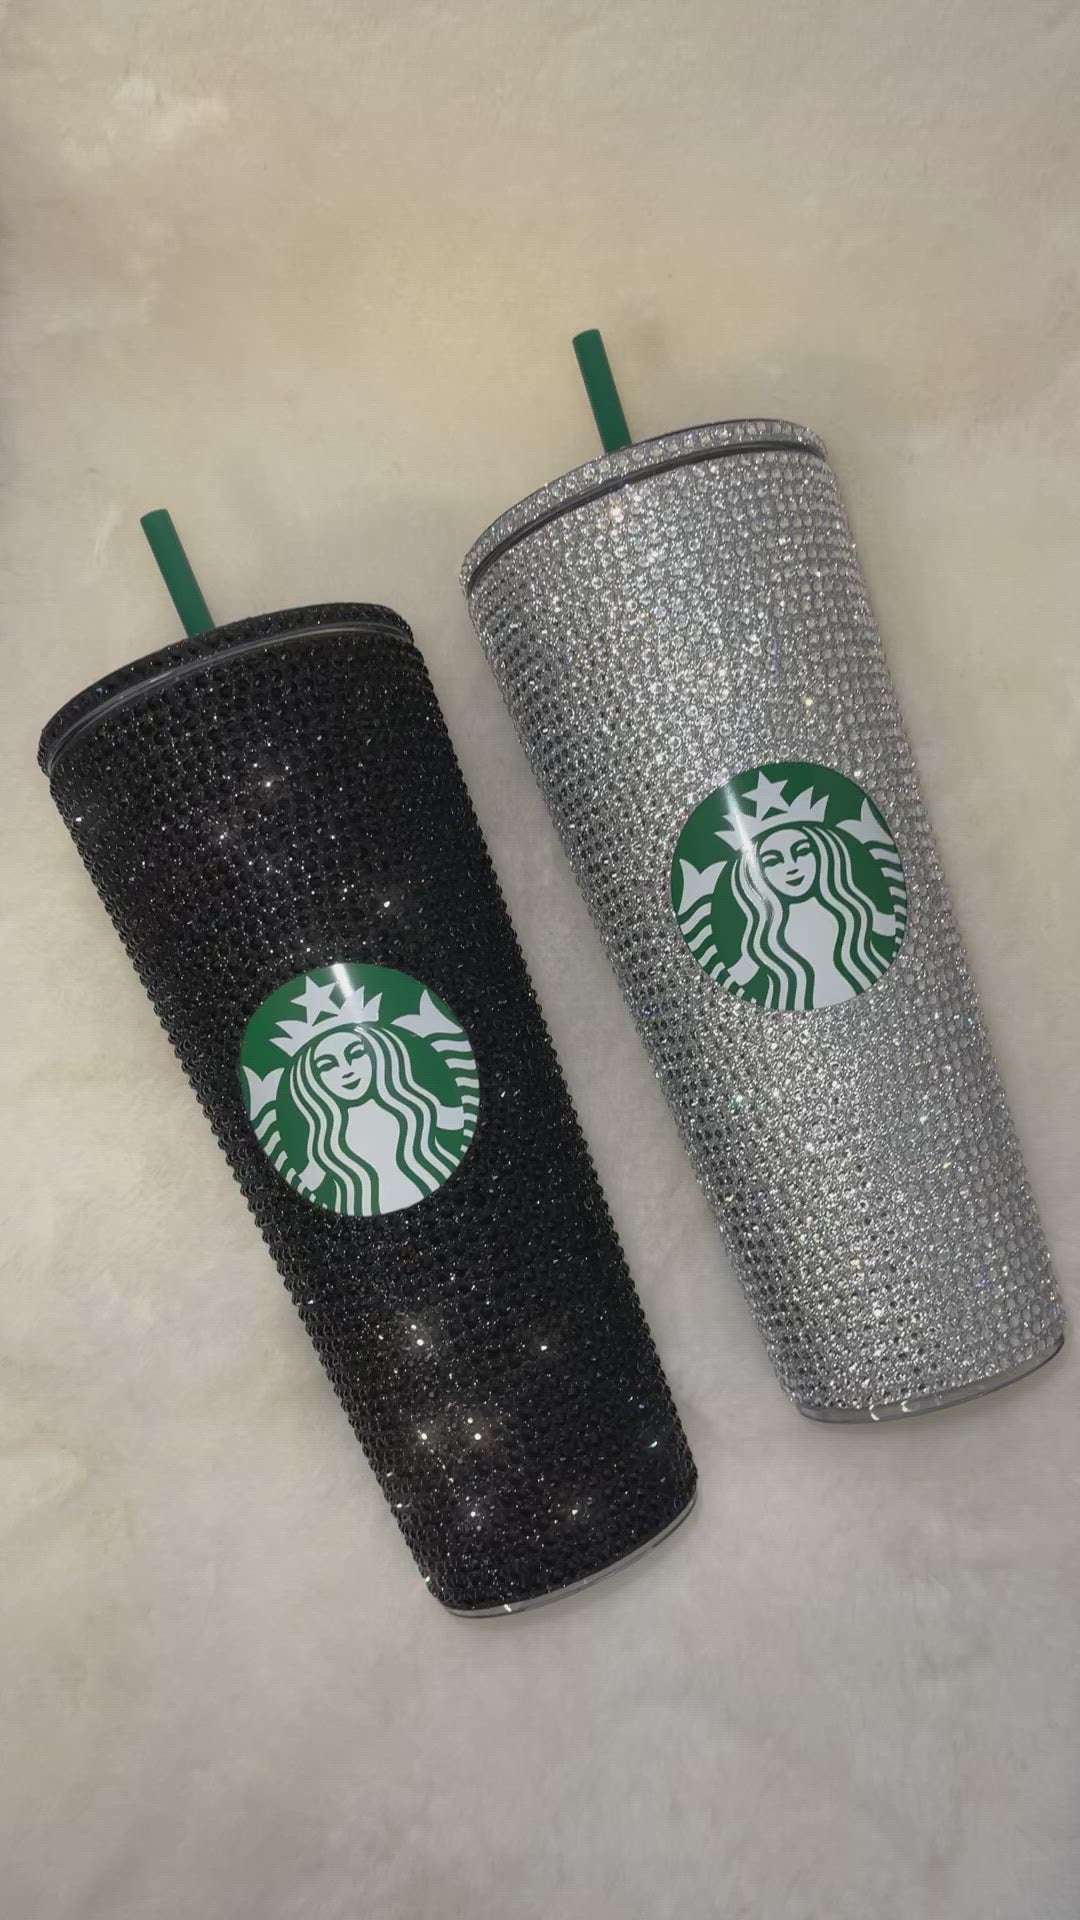 Starbucks studded diamond tumbler cup injection mould